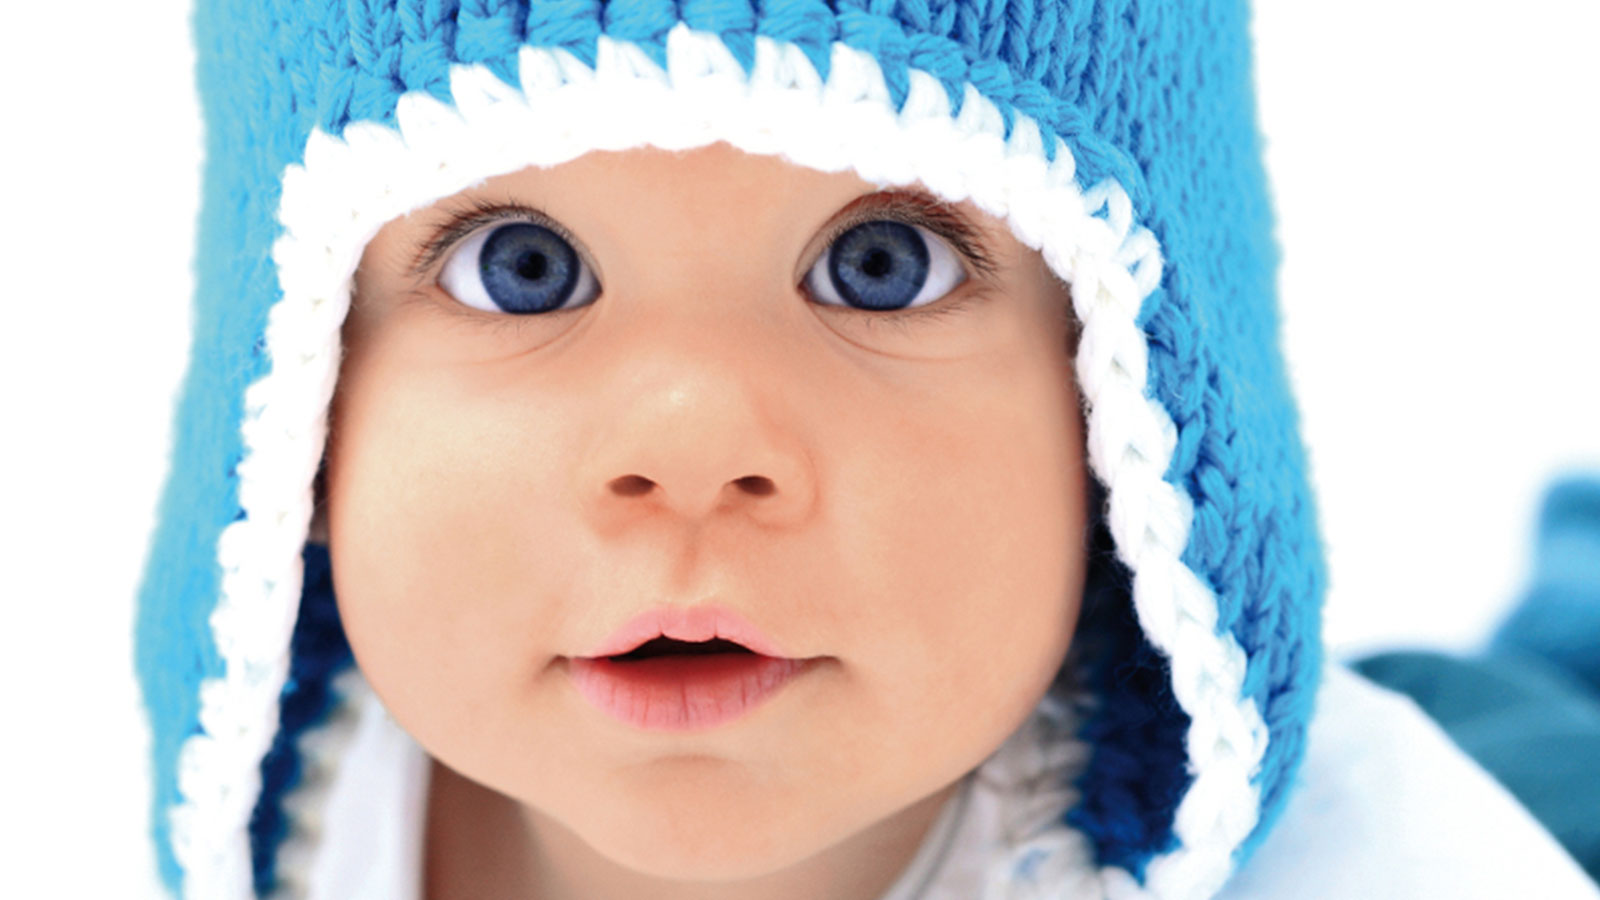 A baby with a blue cap